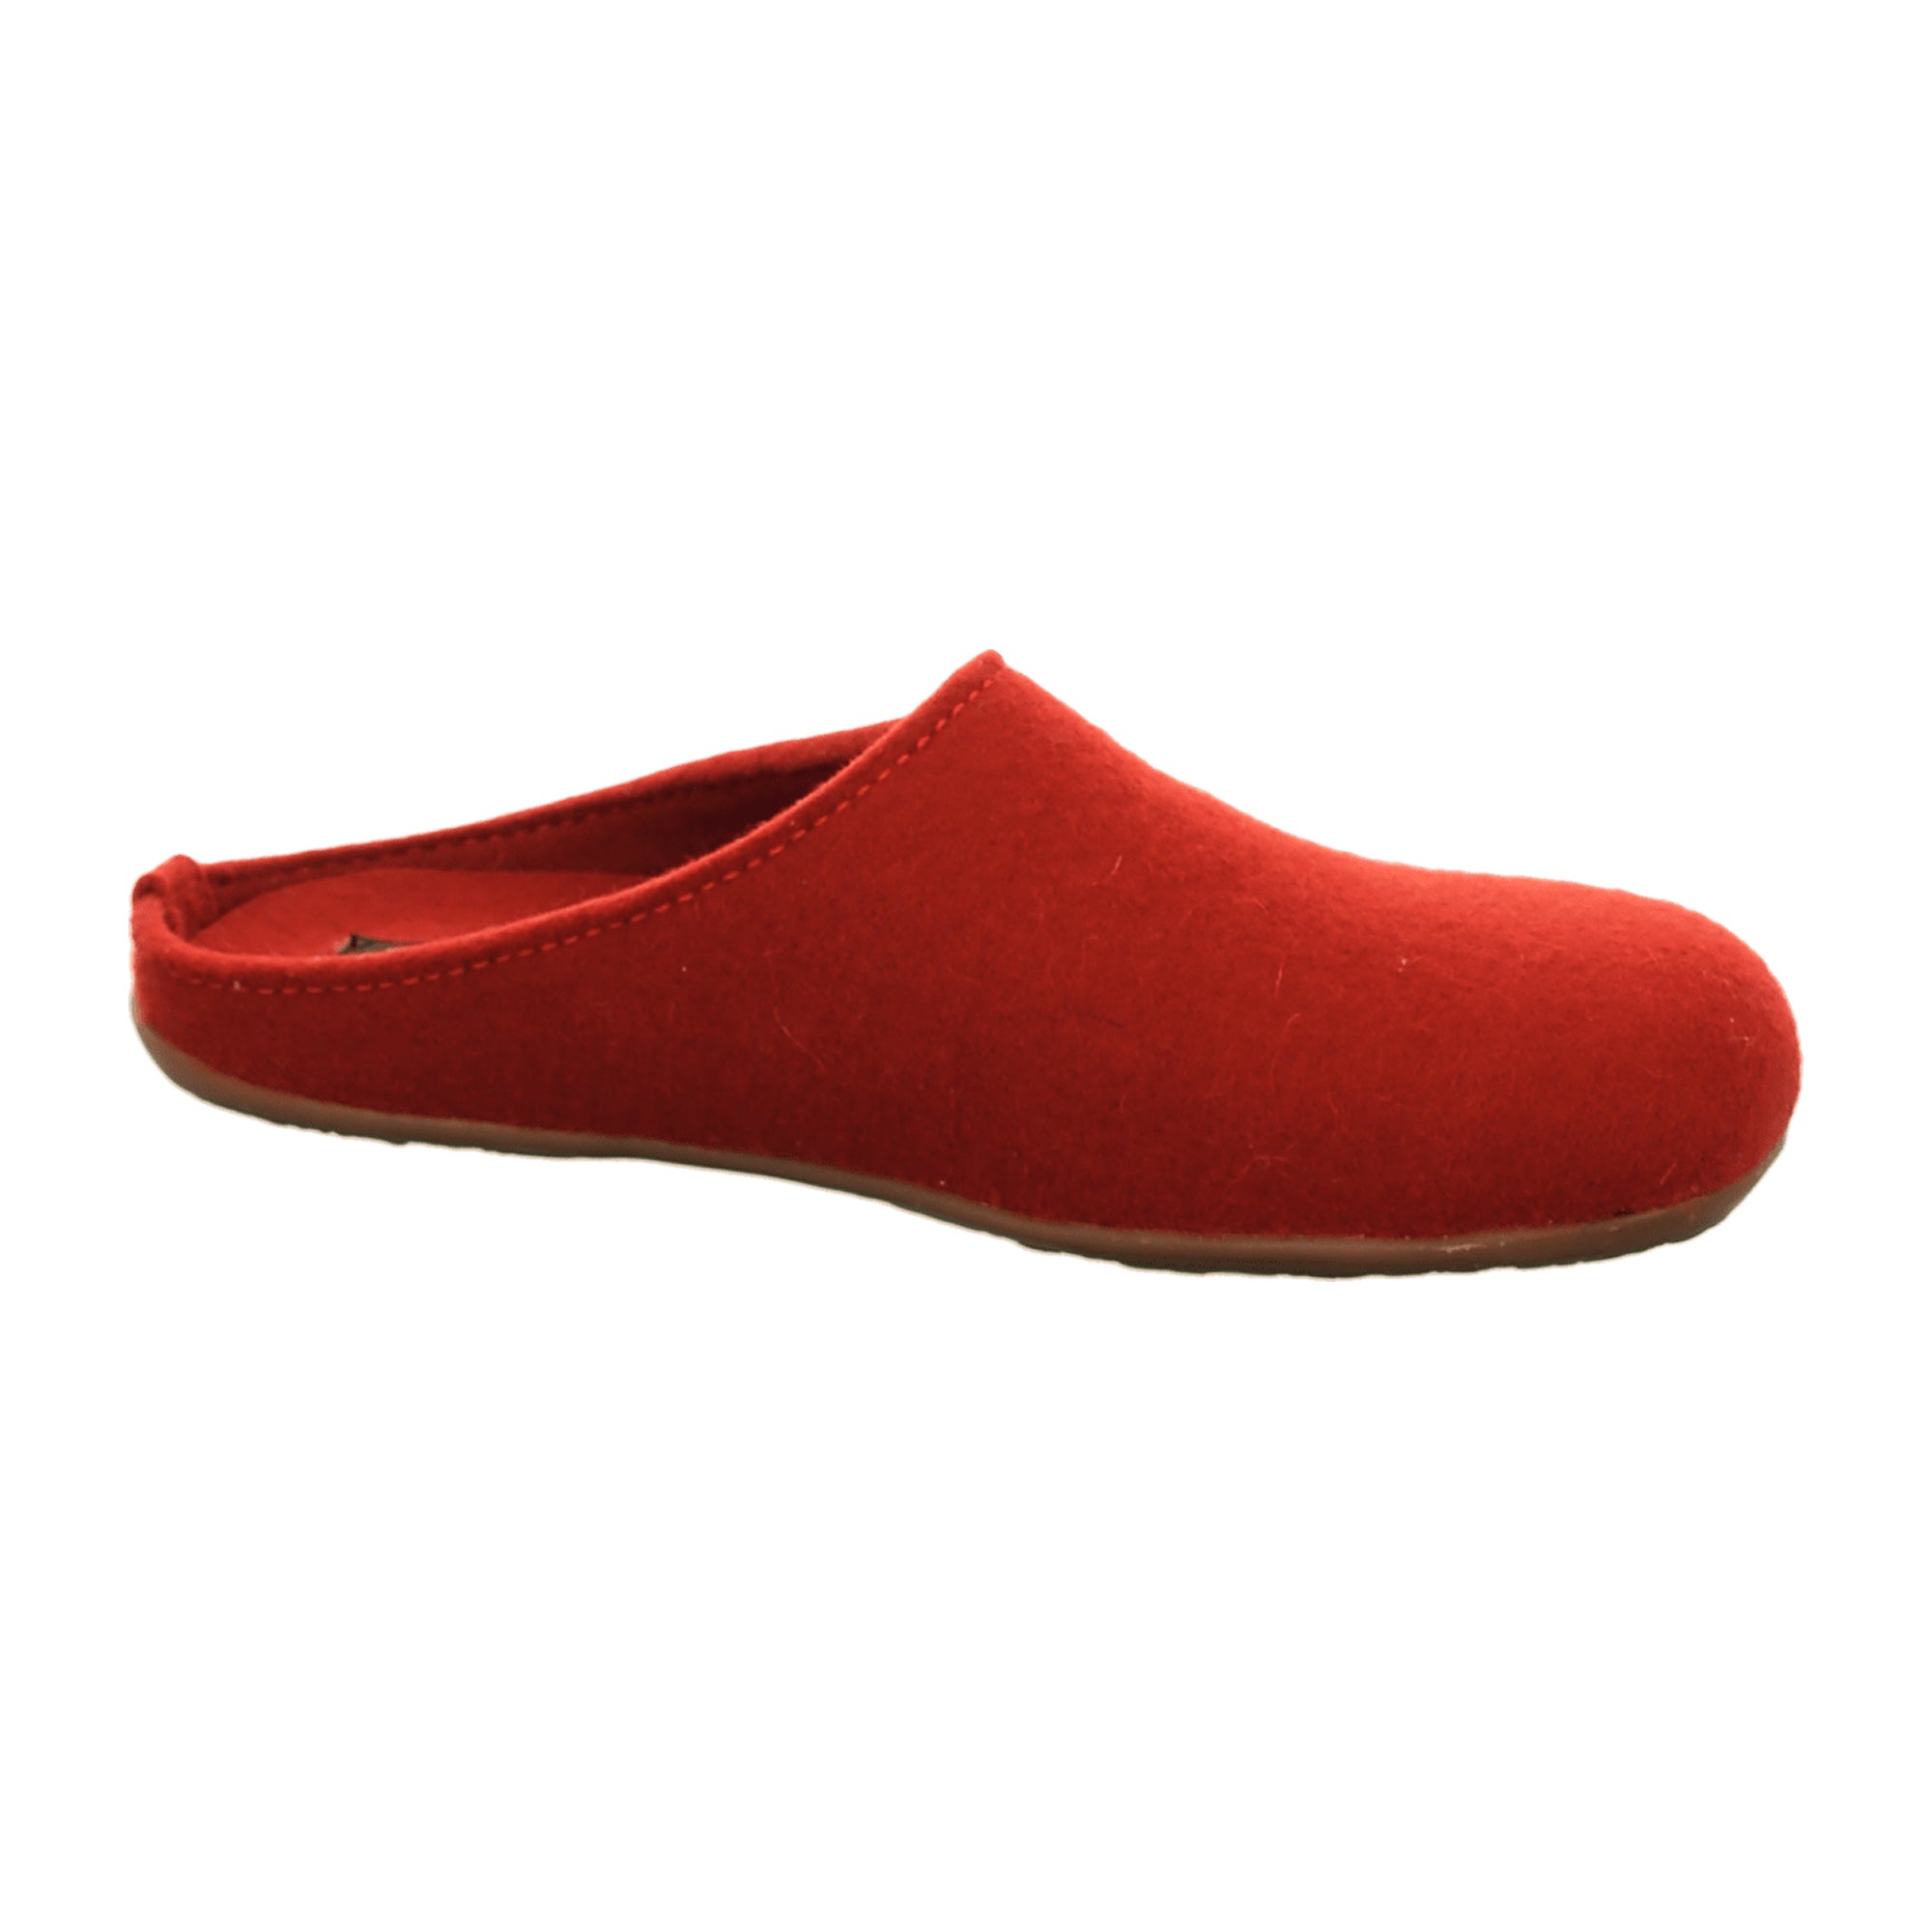 Haflinger Women's Wool Clogs 48102411 - Comfortable and Stylish Red Footwear